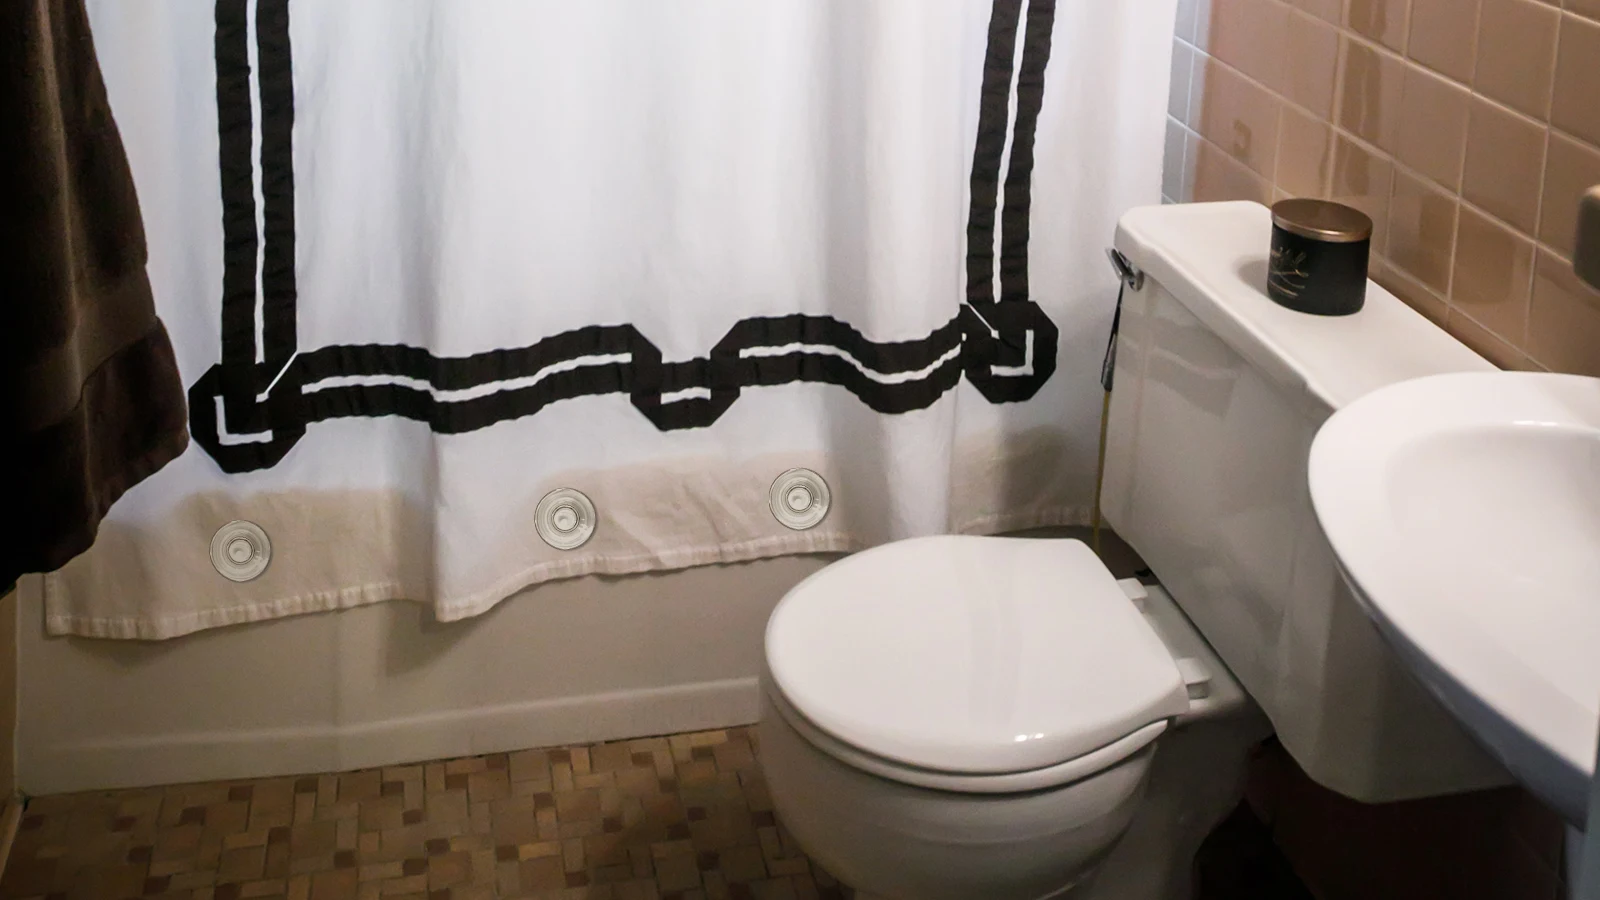 A bathroom with a black and white shower curtain that demonstrates how keeping the shower curtain closed effectively improves privacy and prevents water from splashing onto the floor.